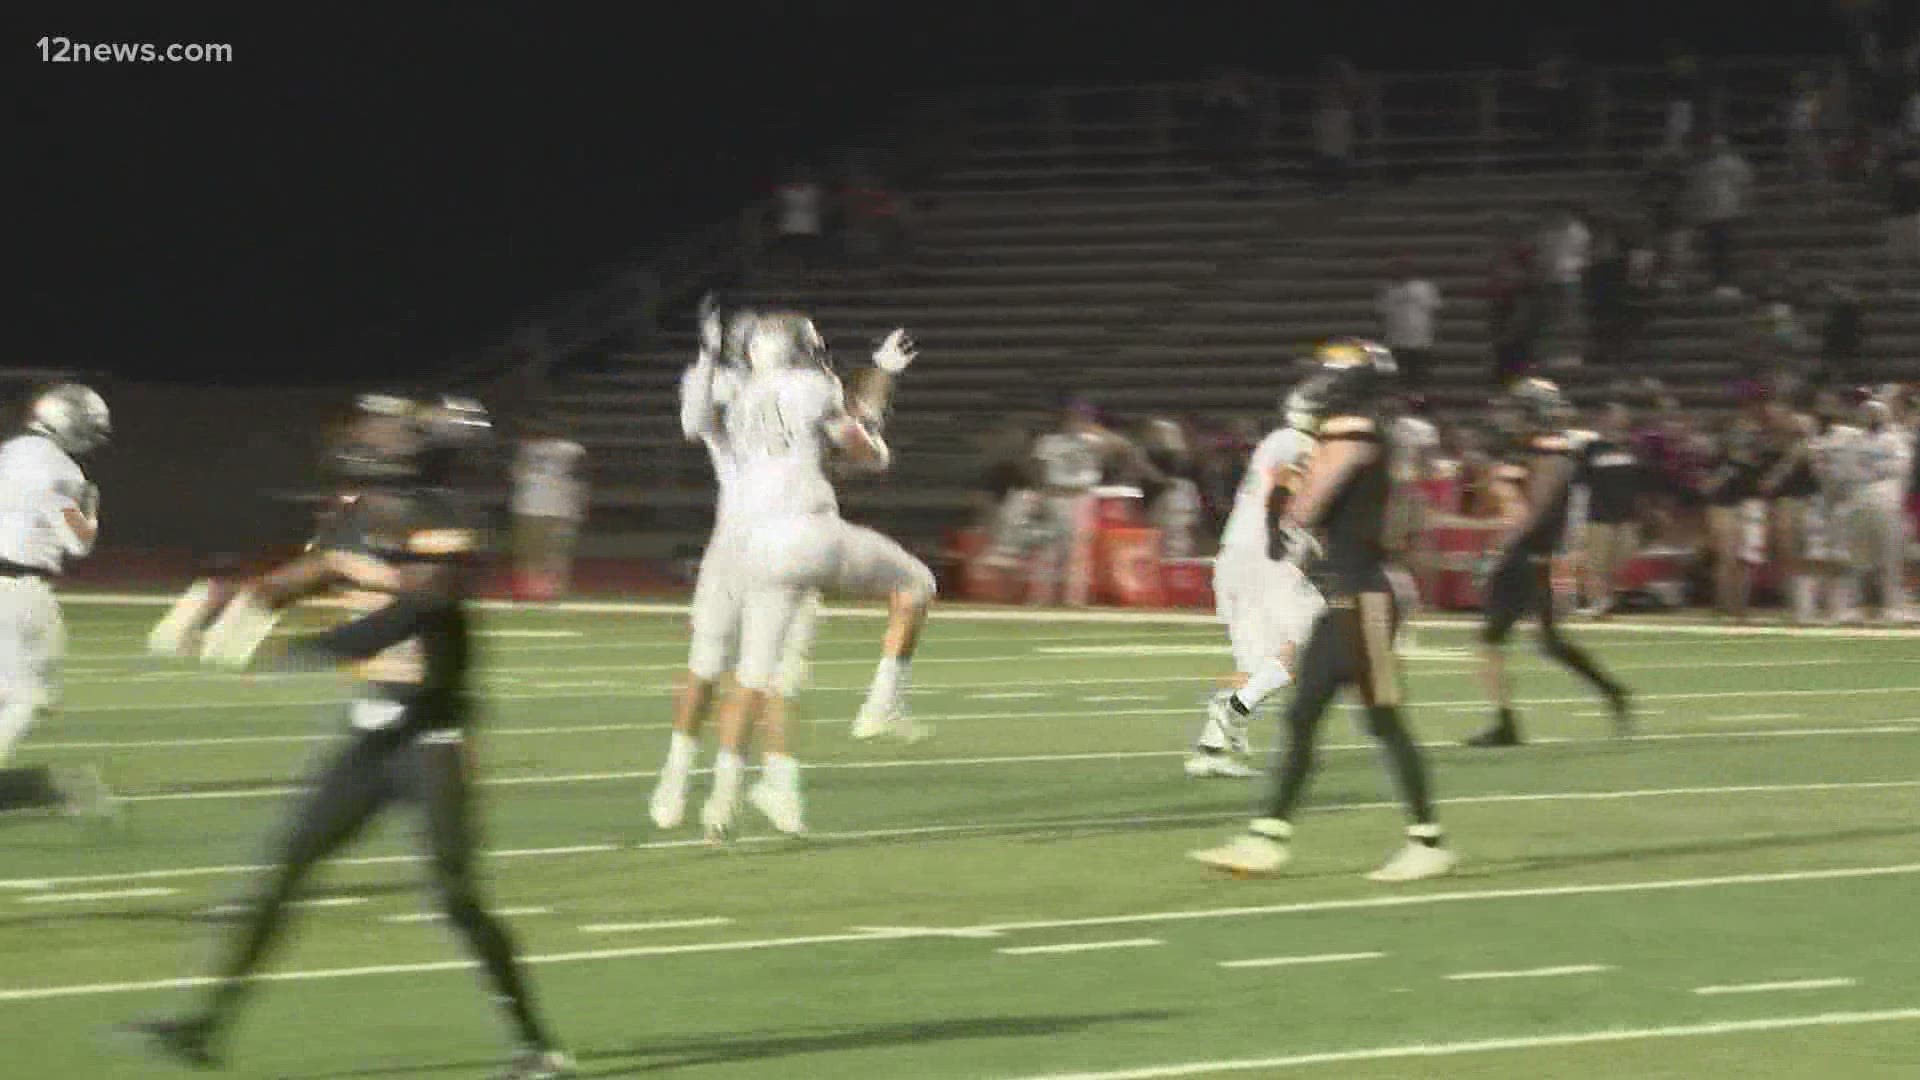 Friday Night Fever Game of the Week: Hamilton defeats Saguaro on national TV